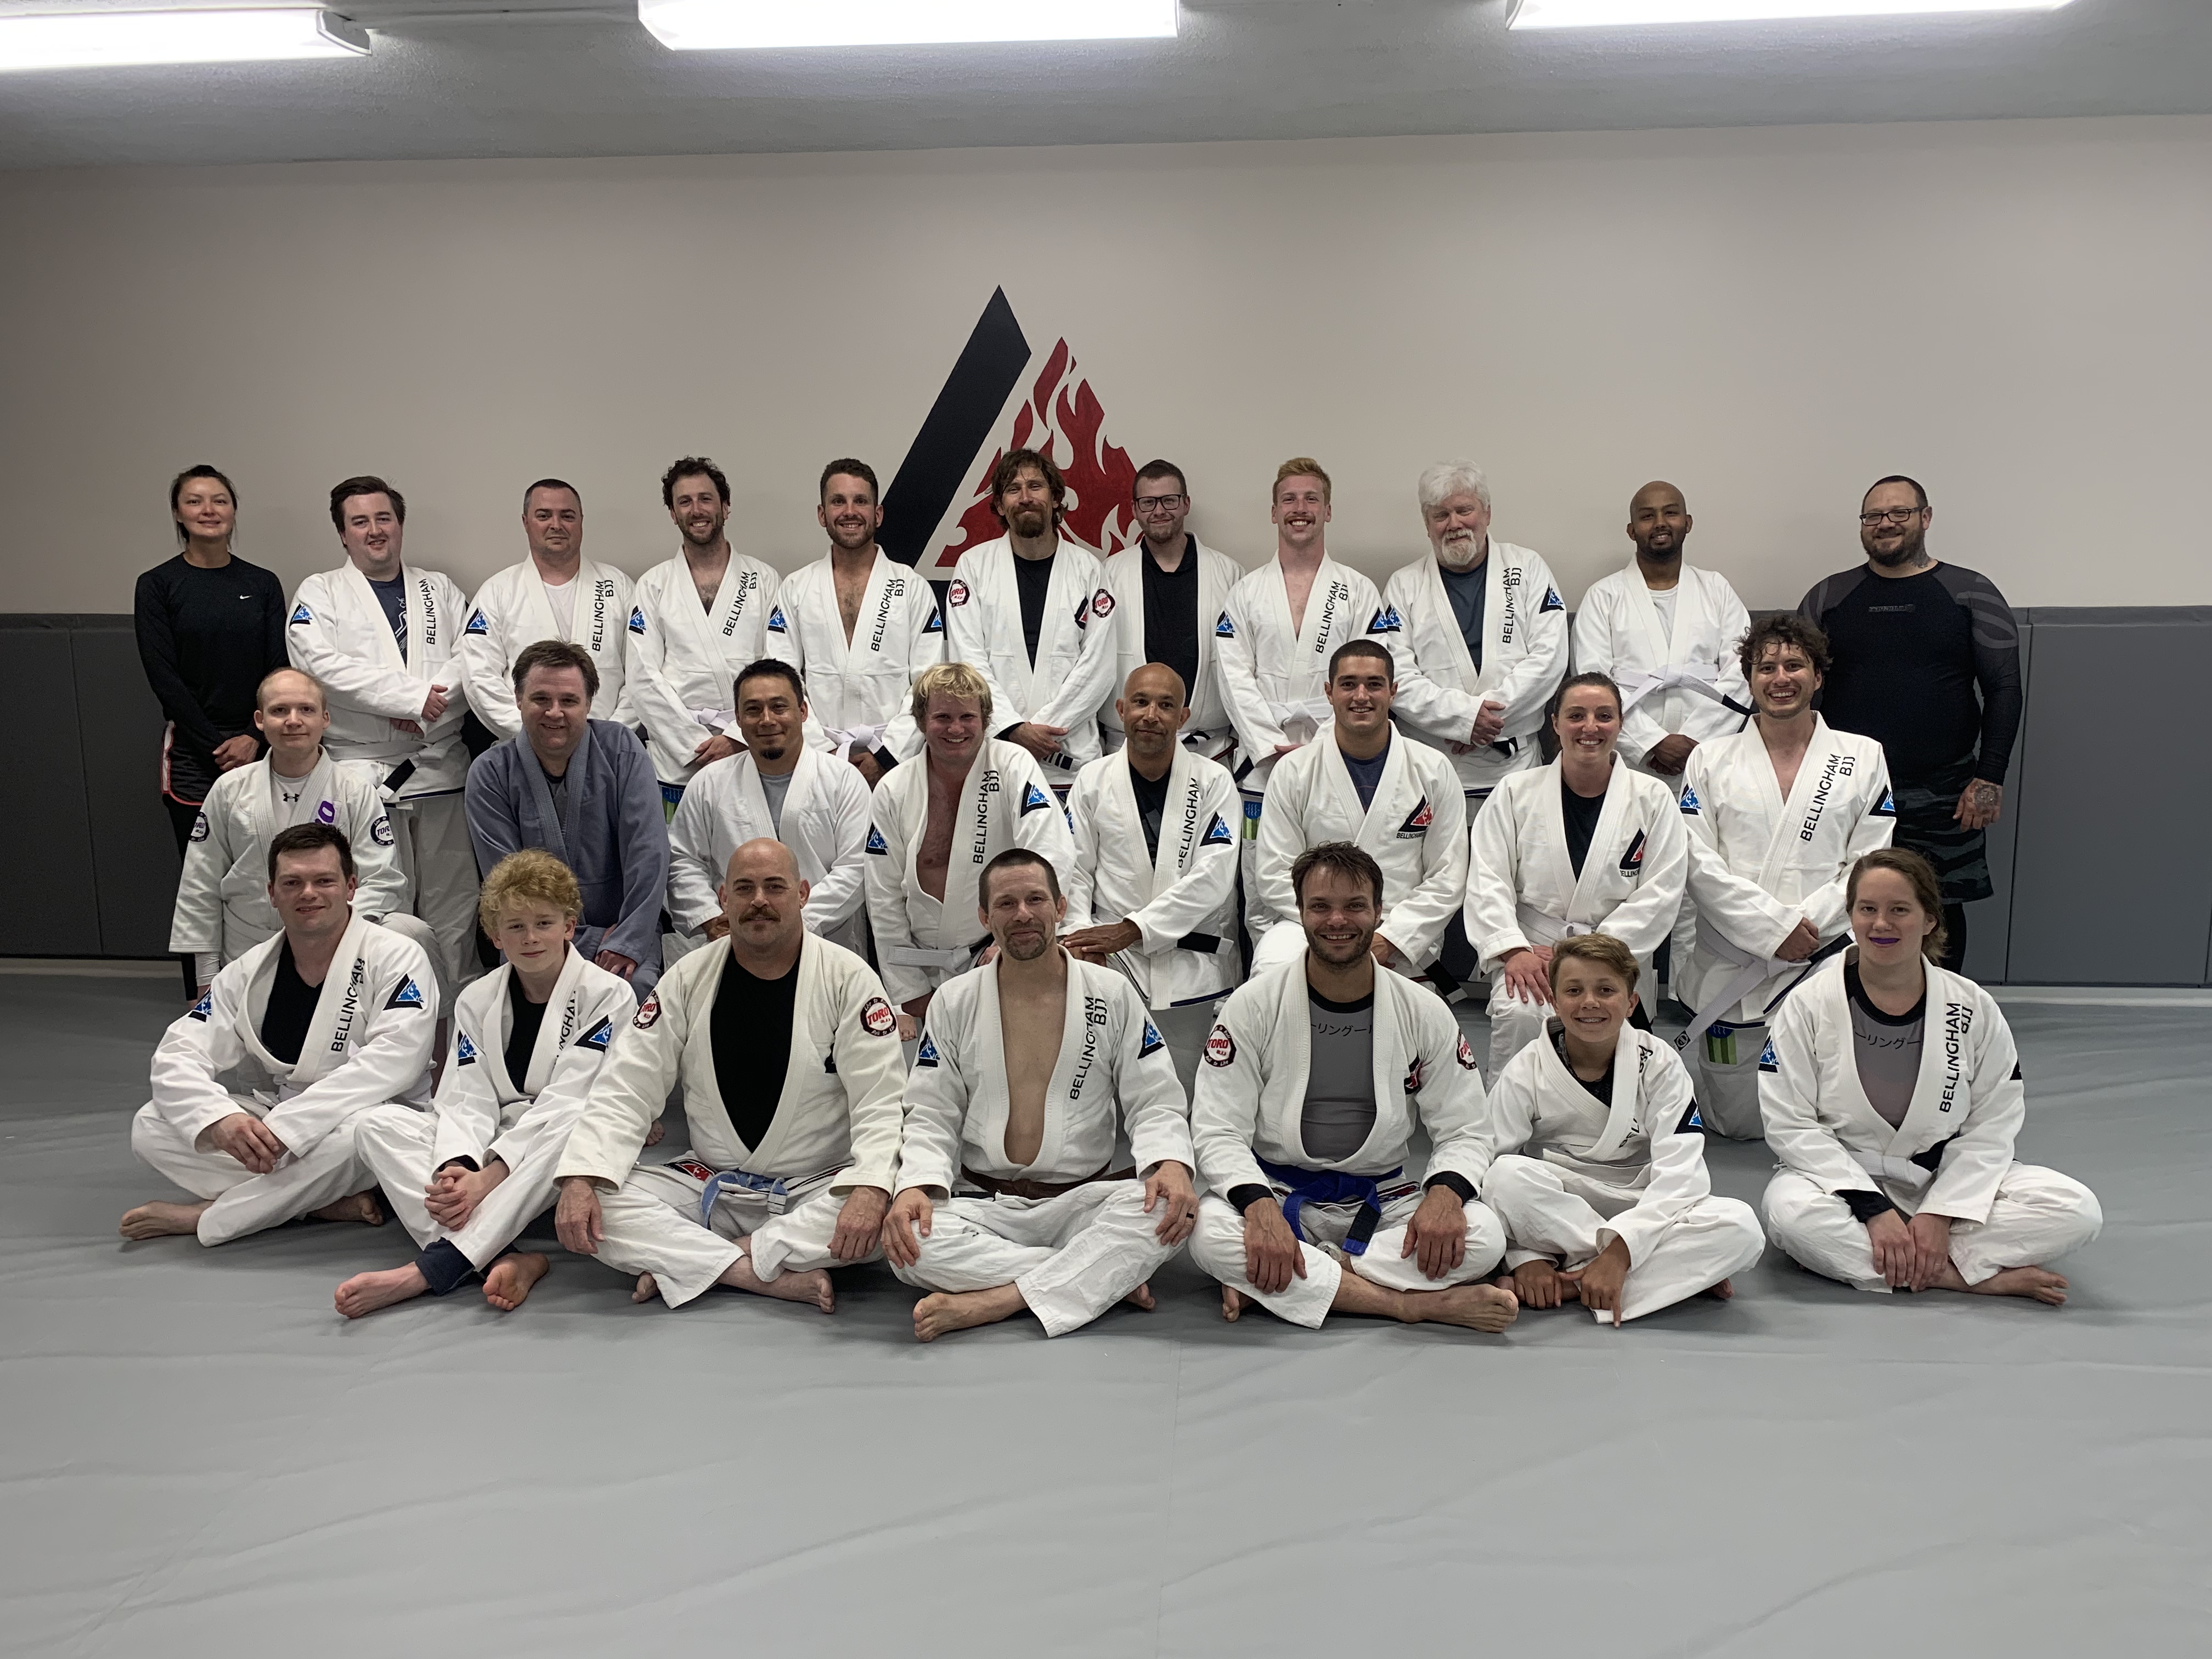 Bellingham BJJ: The First Five Years of Belts